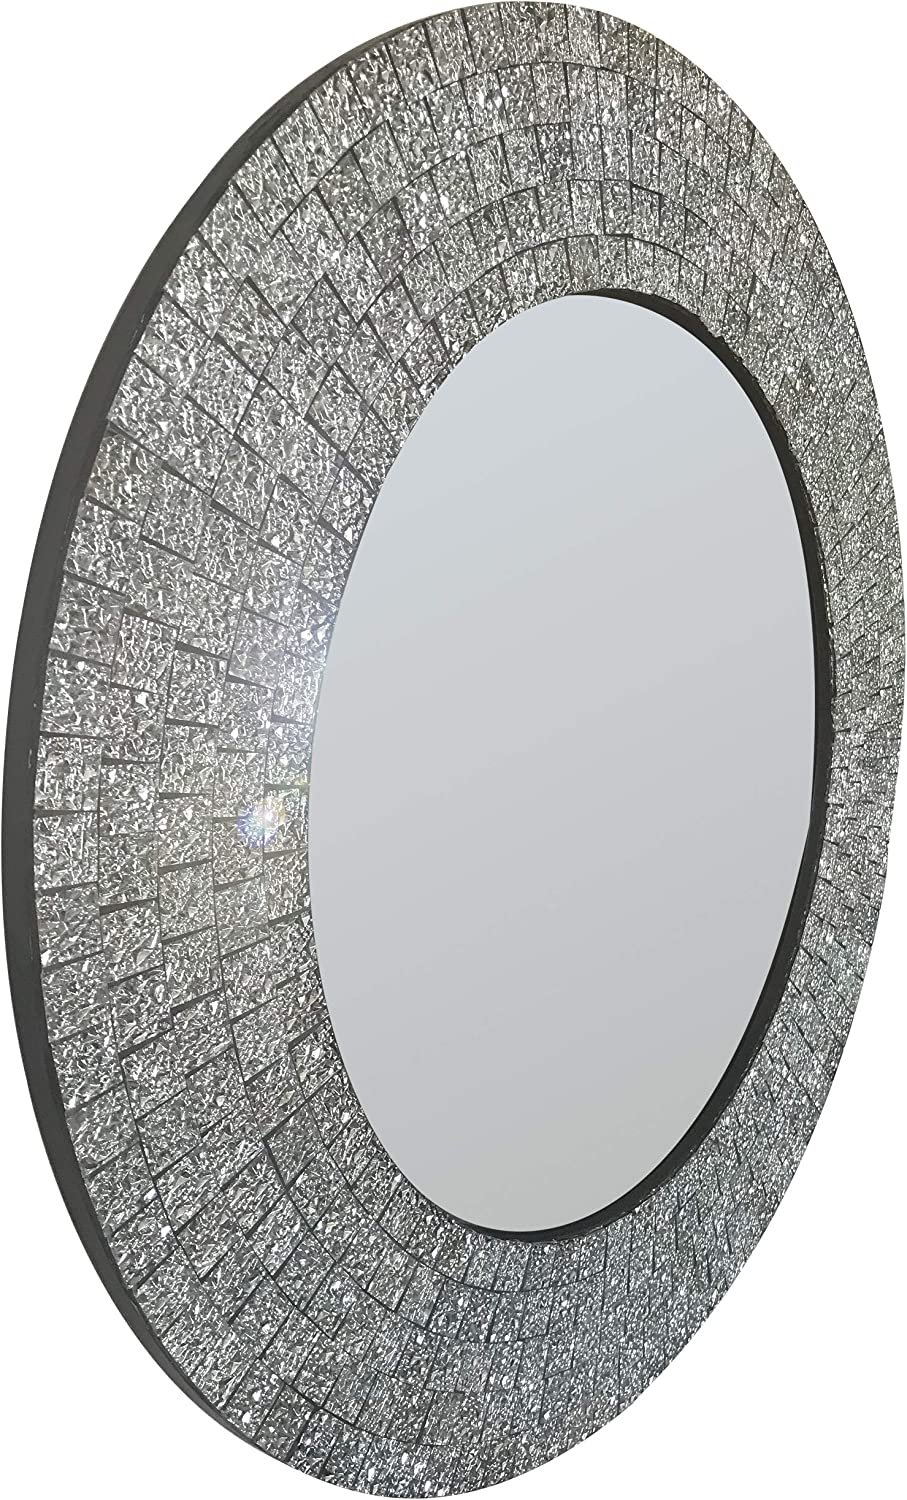 DecorShore 24 in. Glamorous Sparkling Glass Mosaic Wall Mirror Home Decor  in Effervescent Silver